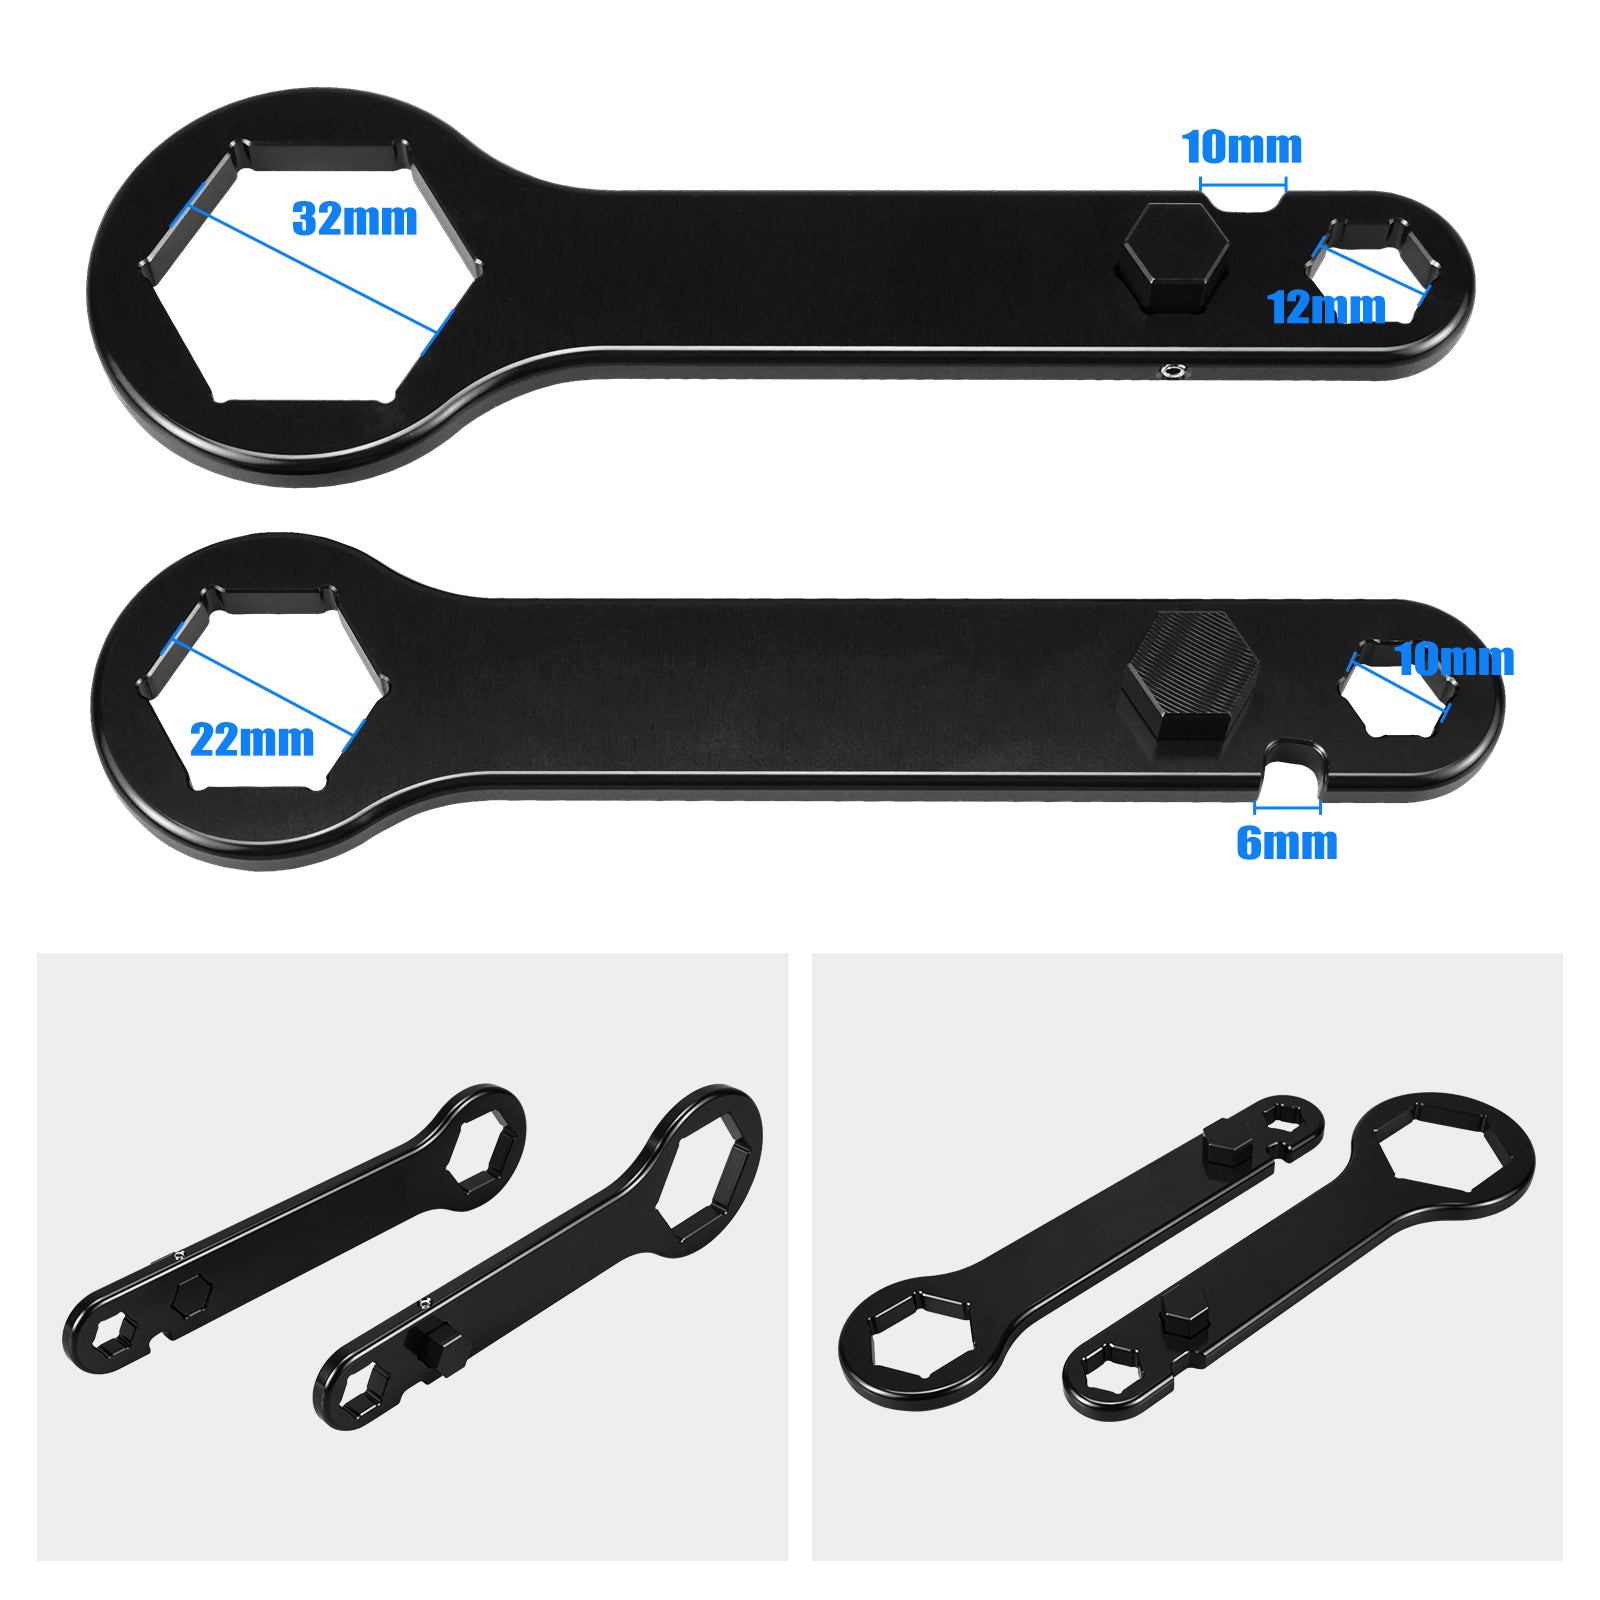 Trail Side Multi Tool 32 22 12 10 mm Wheel Axle Spanner Wrench Removal Tool For Honda CRF 250 450 L/RX/R/X 2016-2021